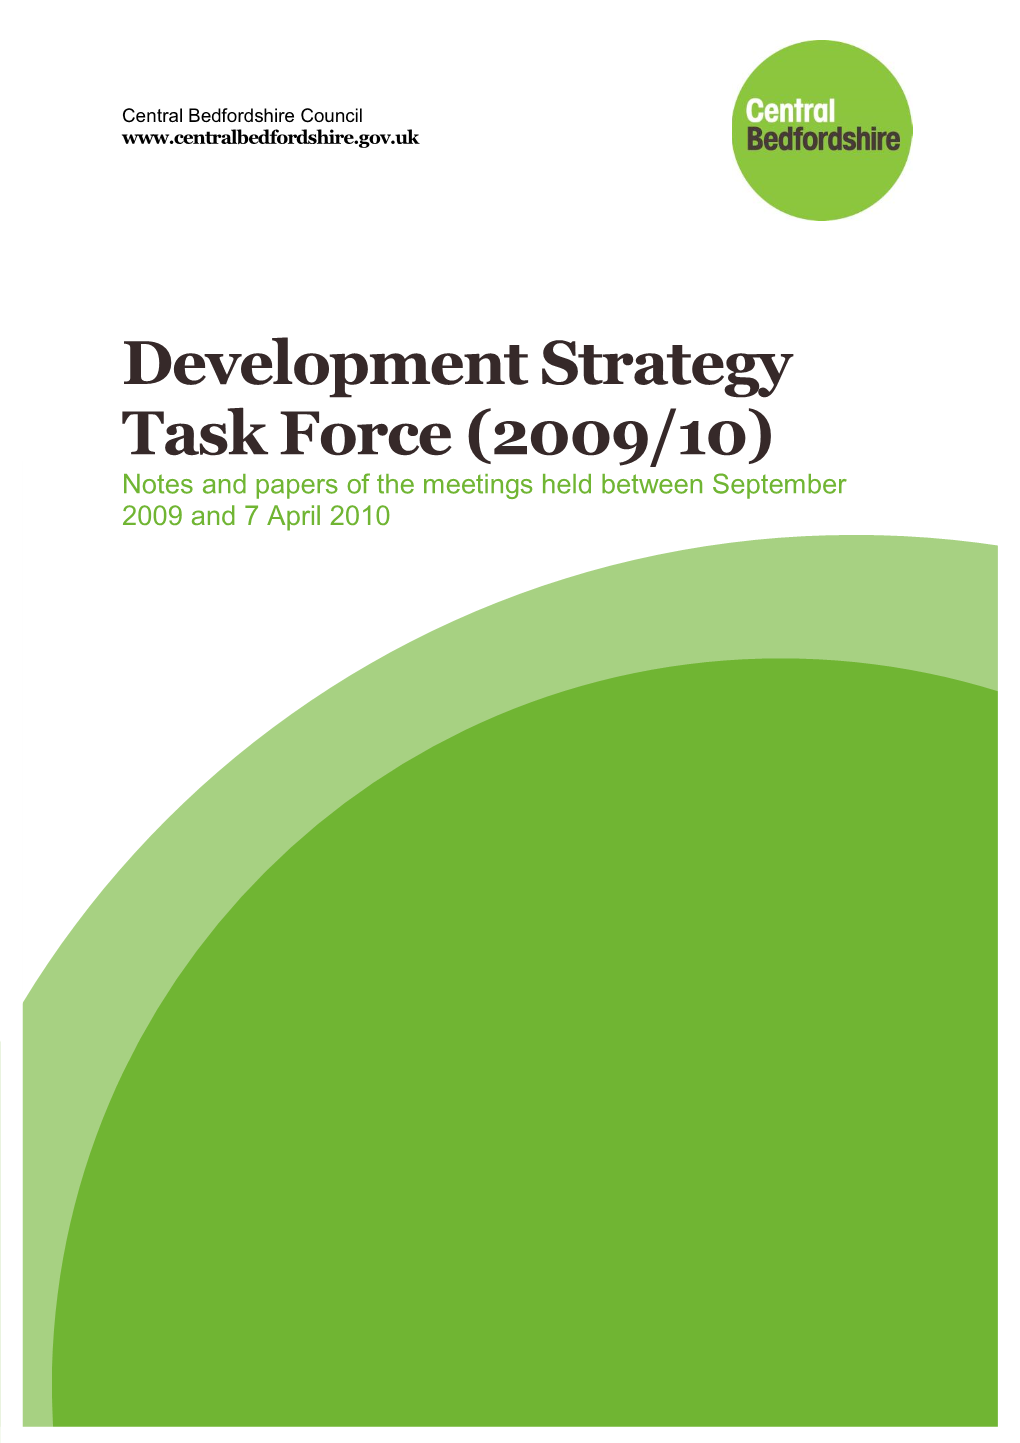 Development Strategy Task Force Notes